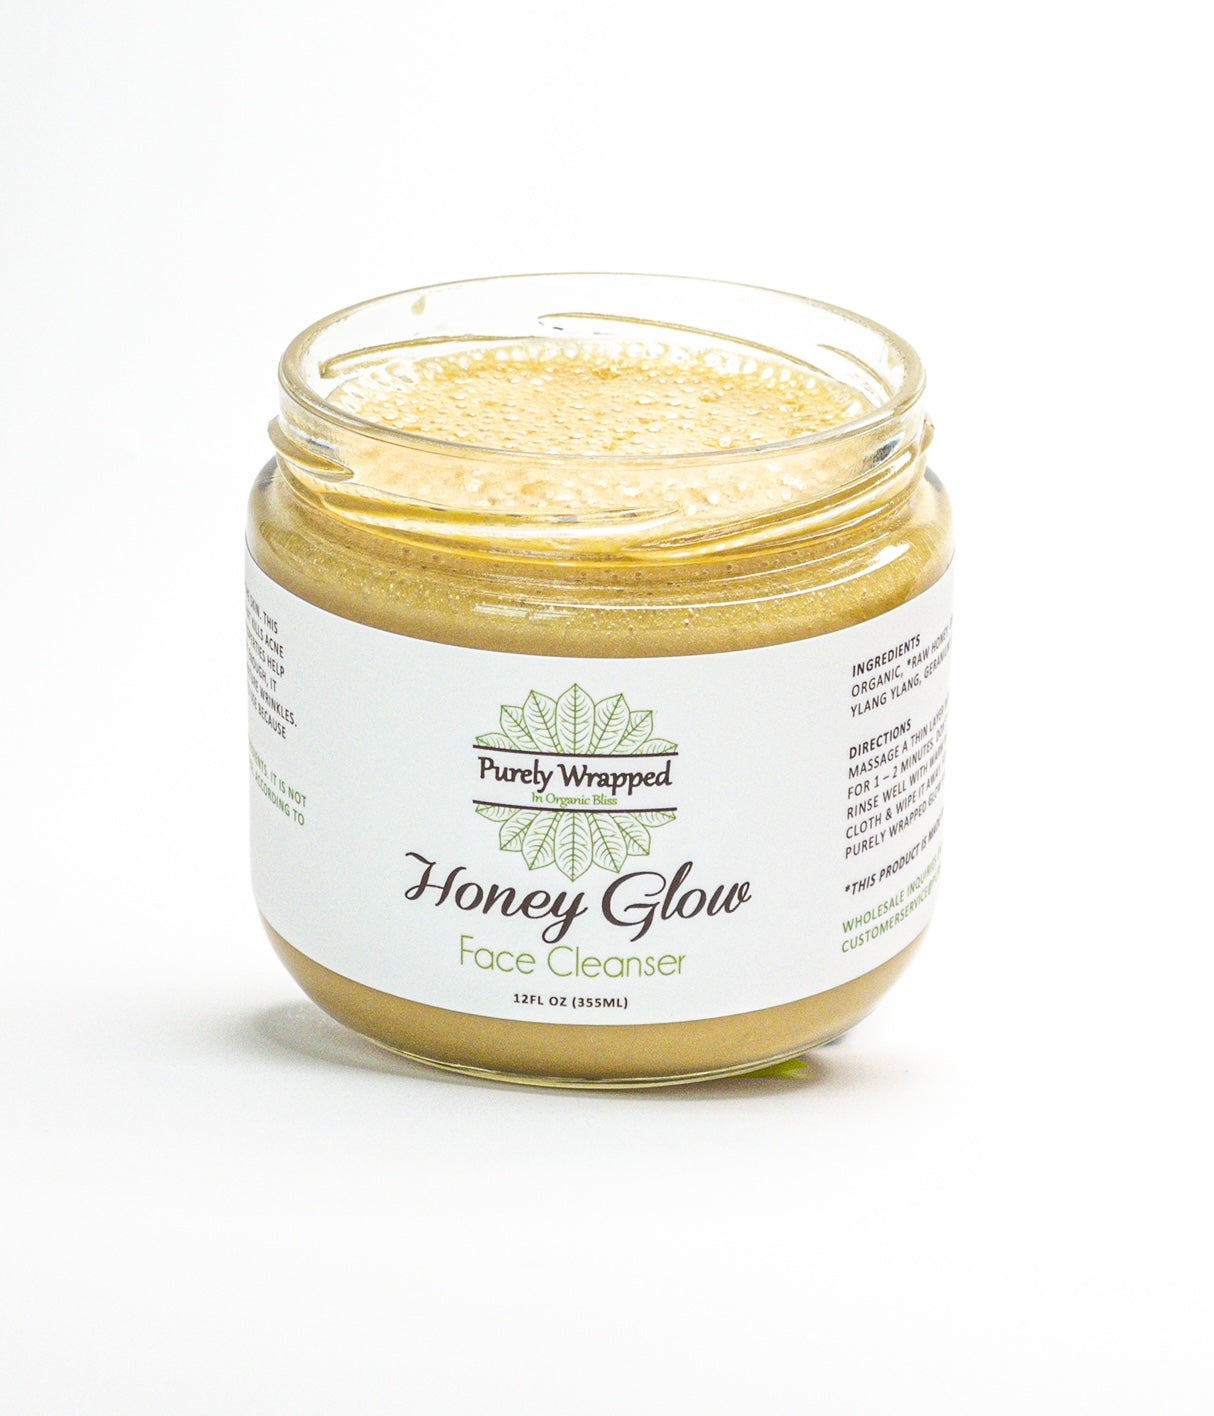 Honey Glow Face Cleanser